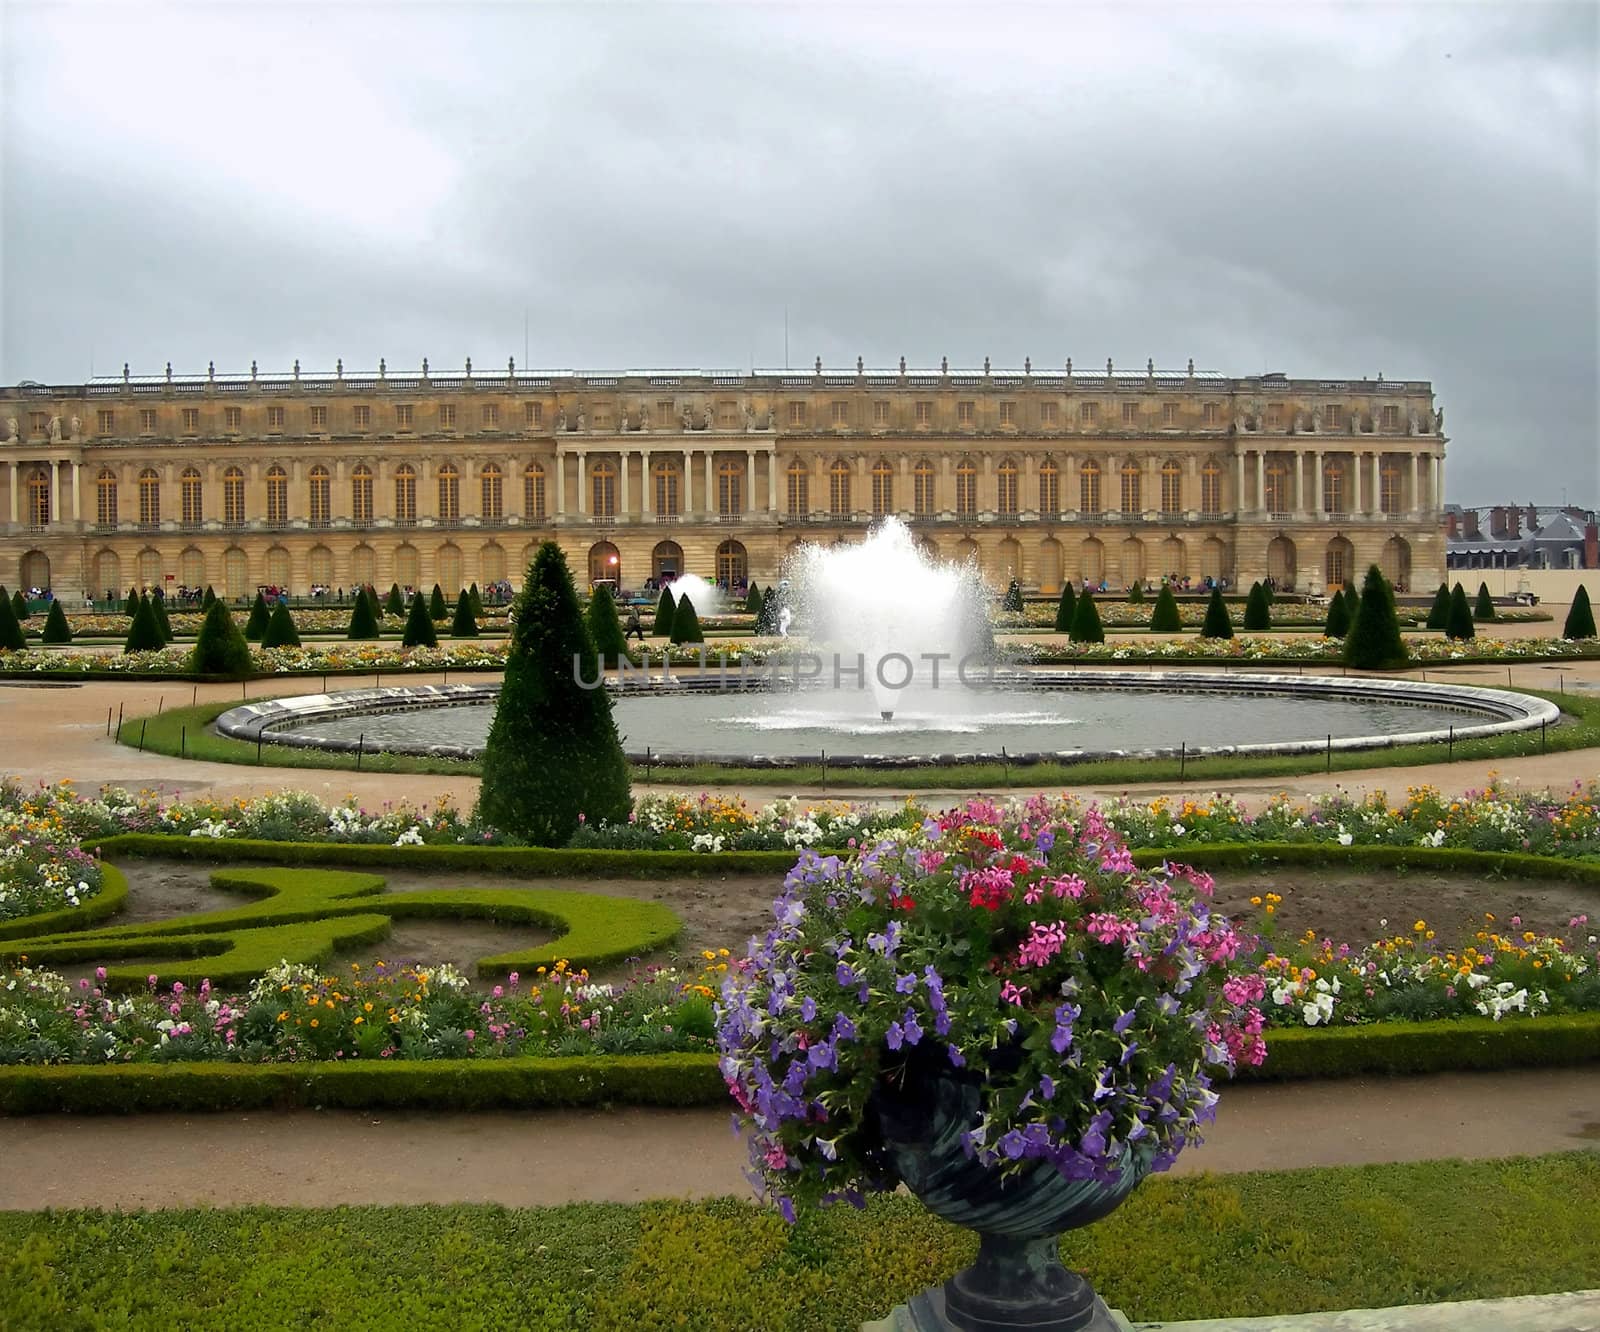 Castle with beautiful gardens in Versailles in France. 